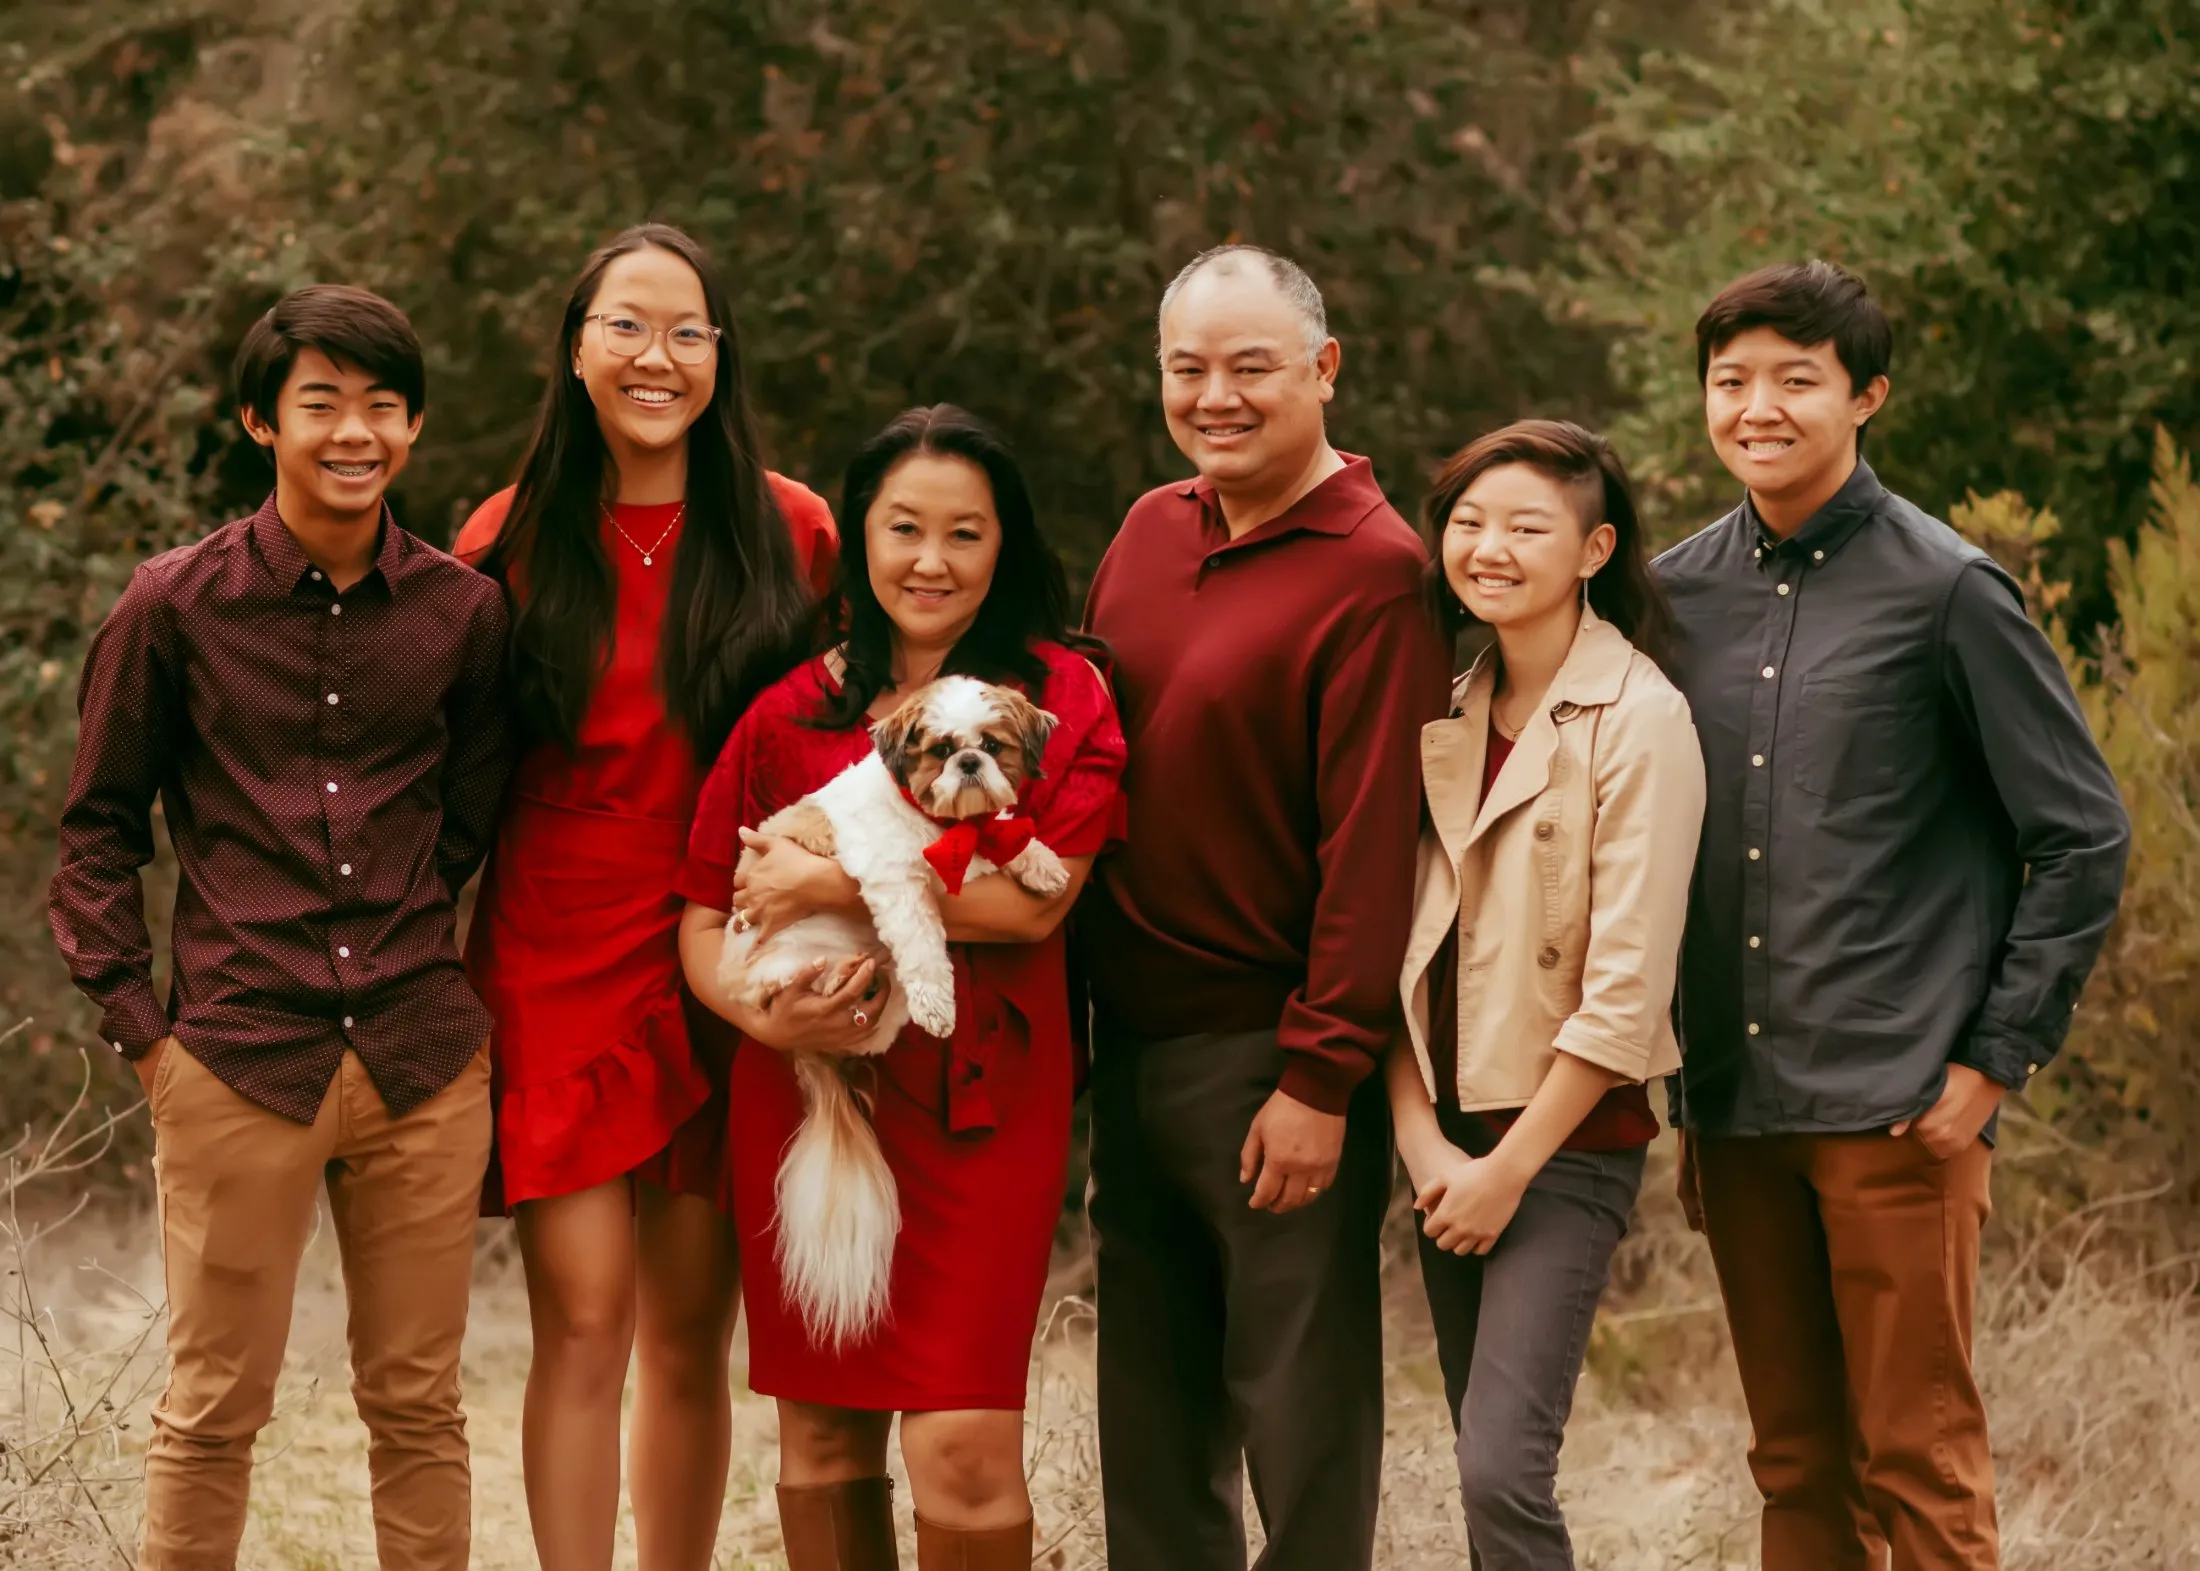 Dr. Chan and his family